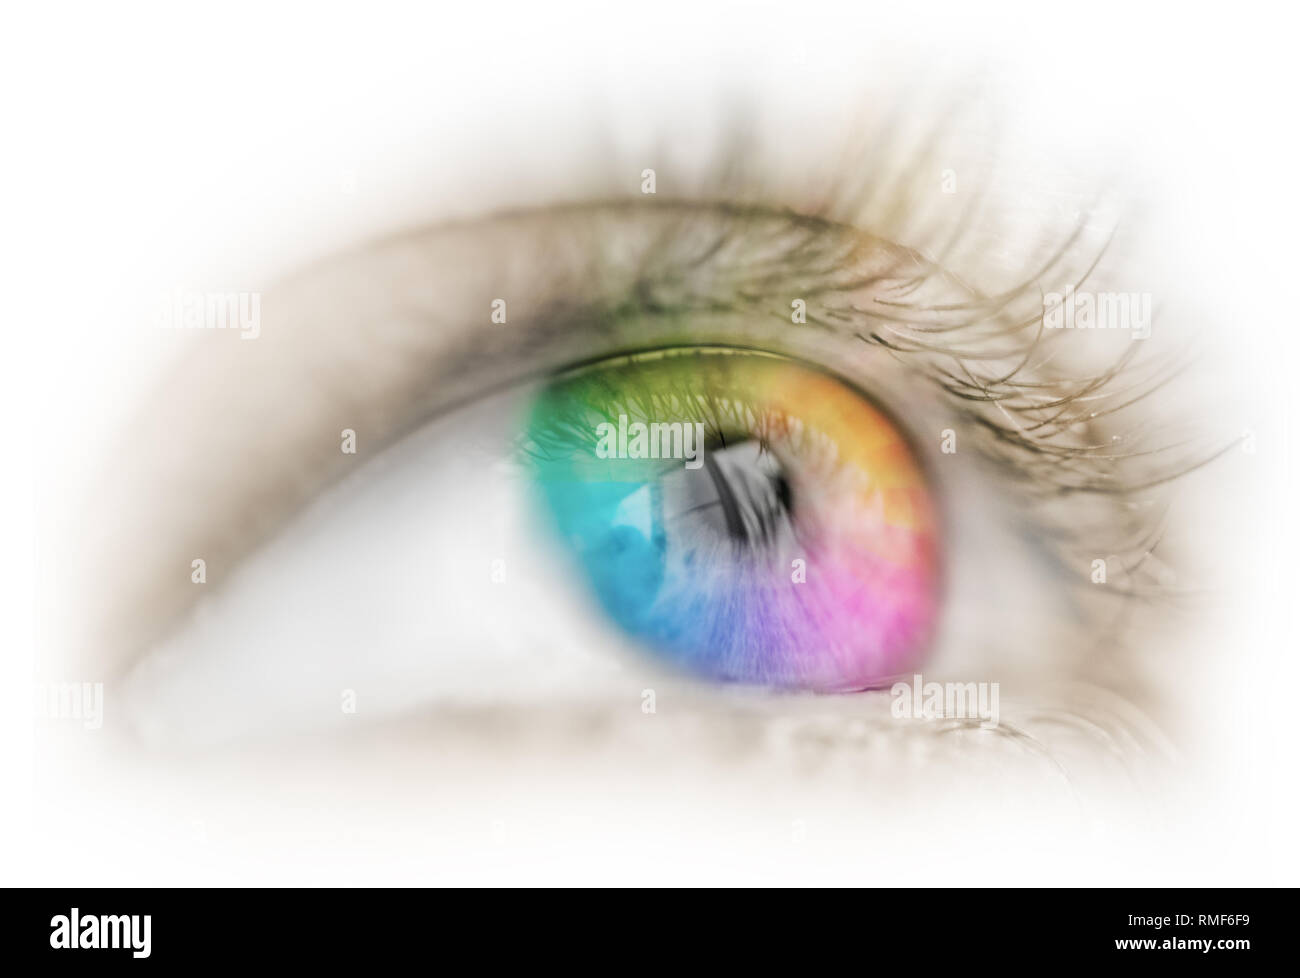 color eye sight concept isolated Stock Photo